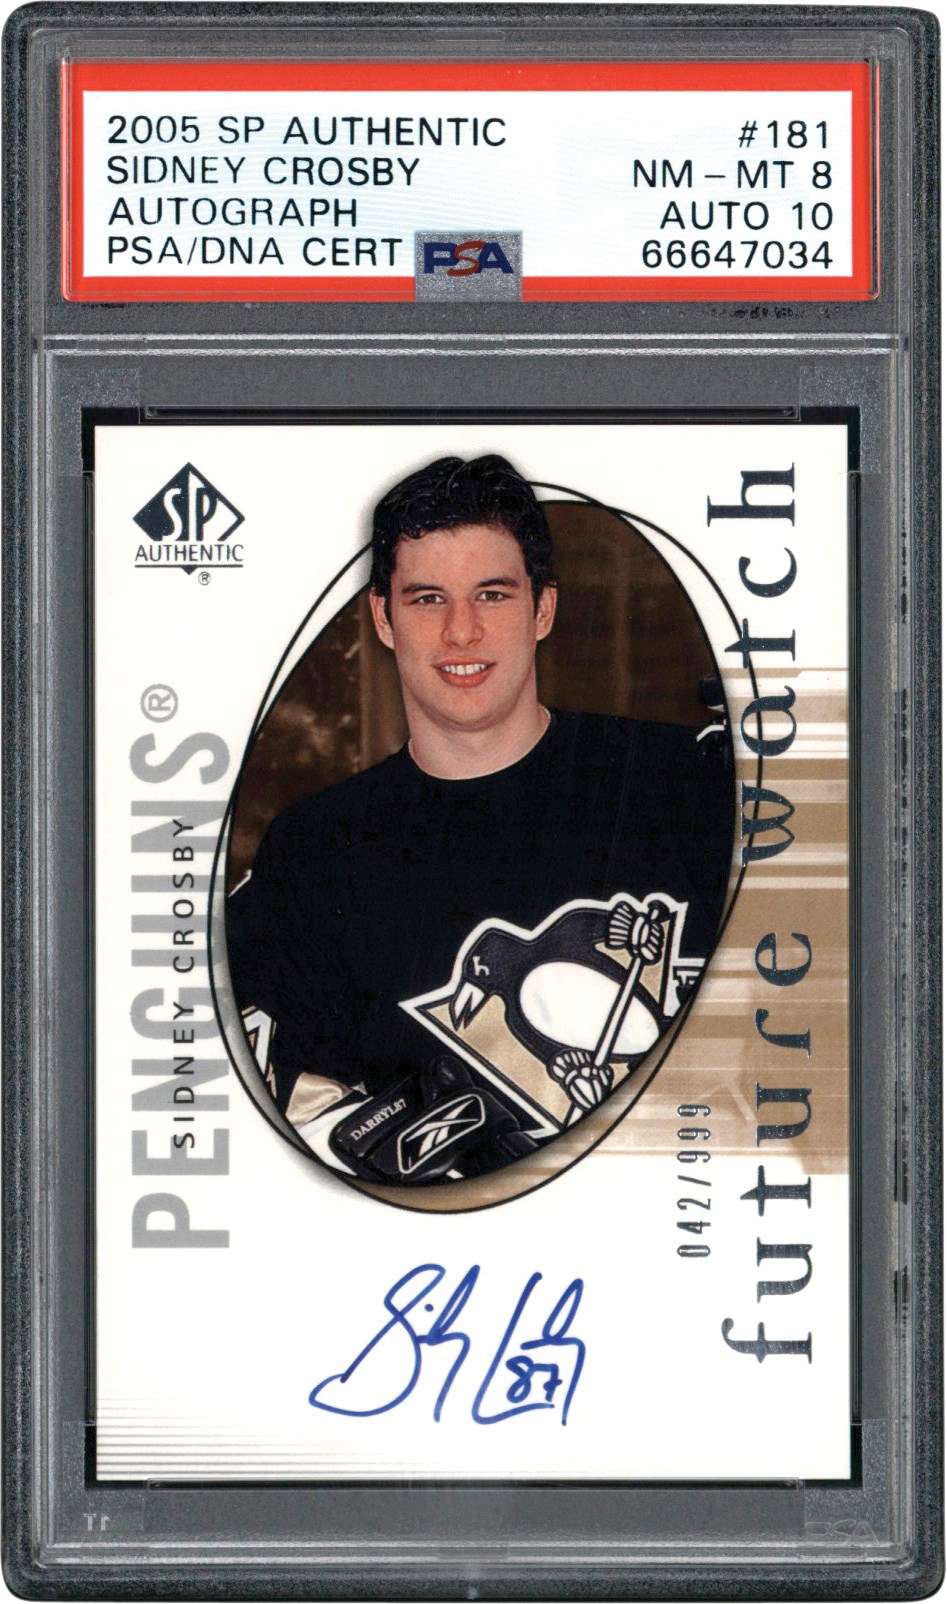 Hockey Cards - 2005-2006 SP Authentic Hockey #181 Sidney Crosby Rookie Autograph Card #42/999 PSA NM-MT 8 Auto 10